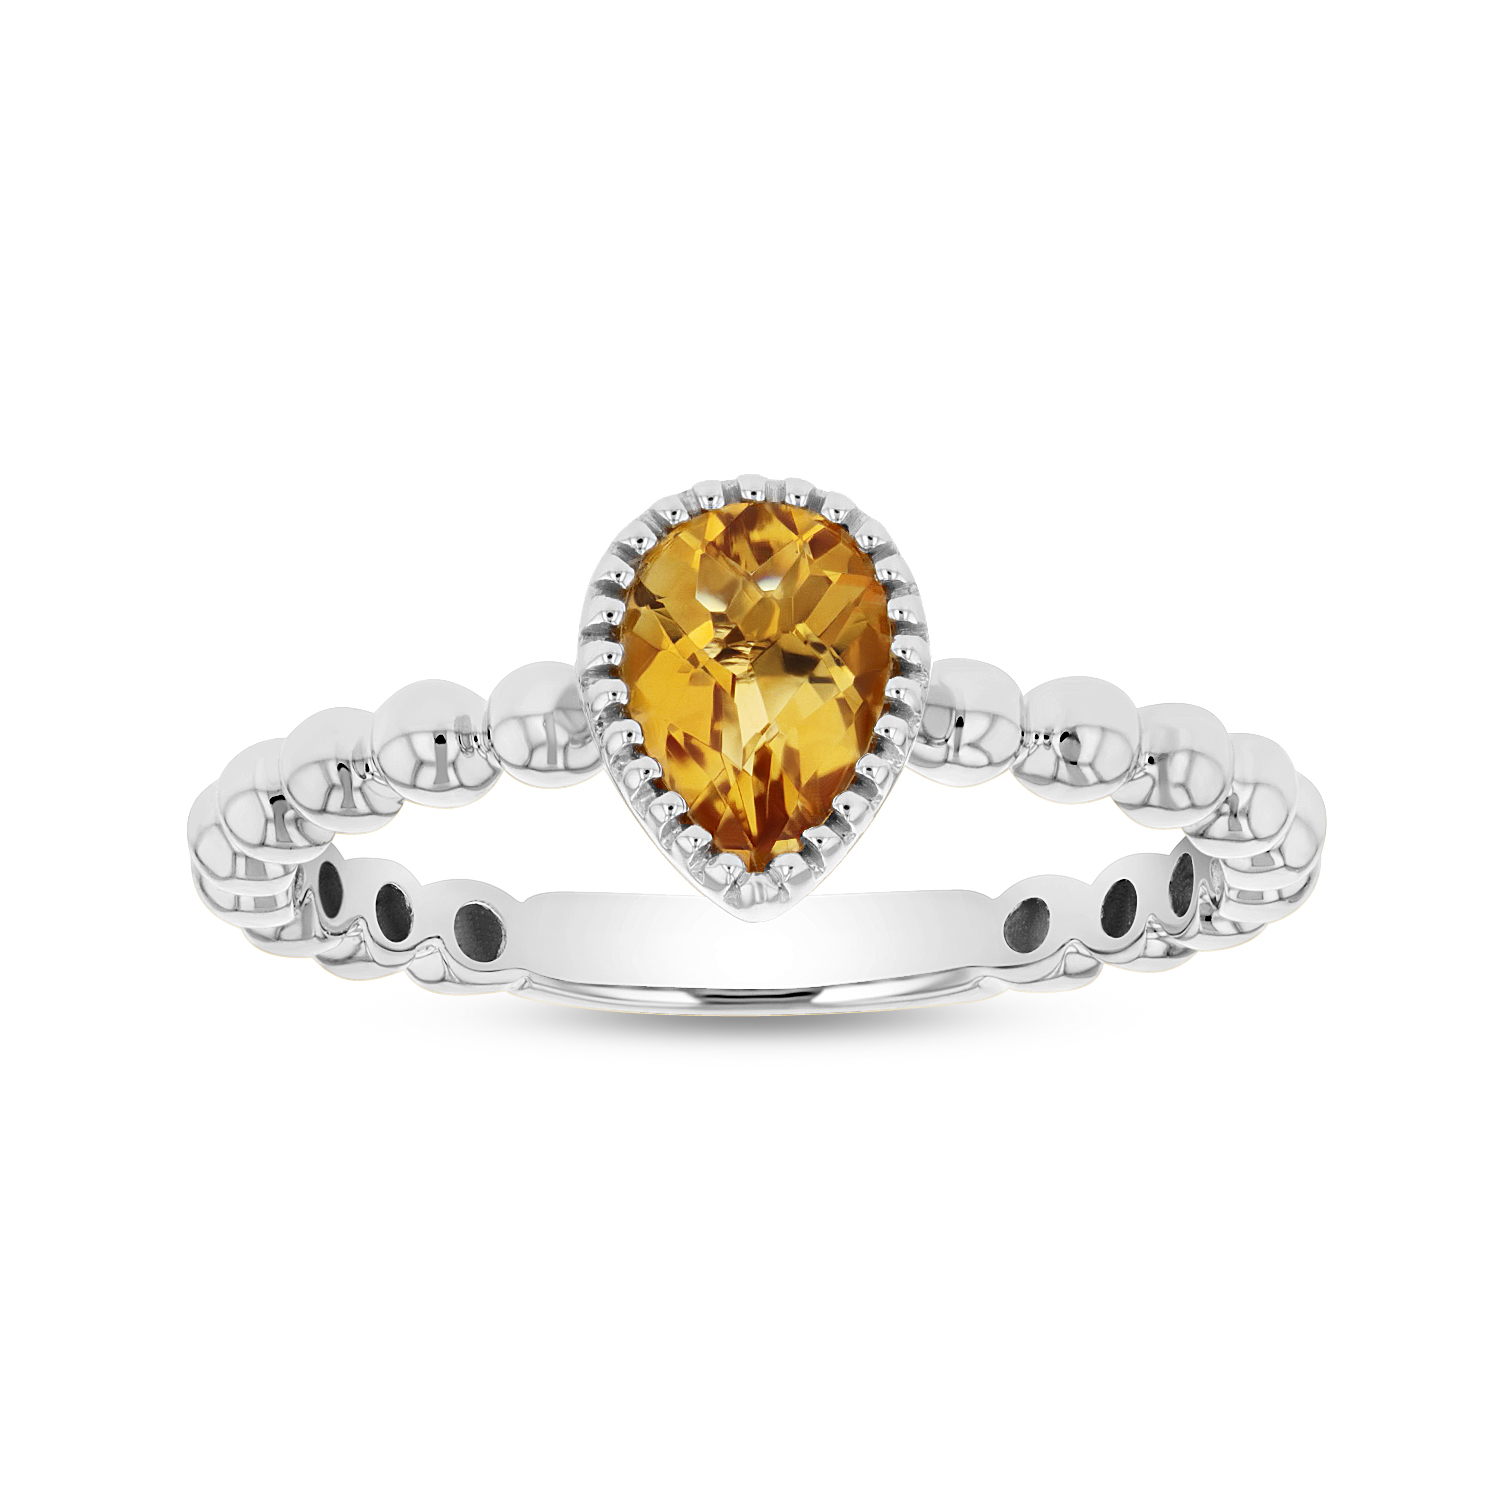 View 7x5mm Pear Shape Citrine Ring in 14k Gold